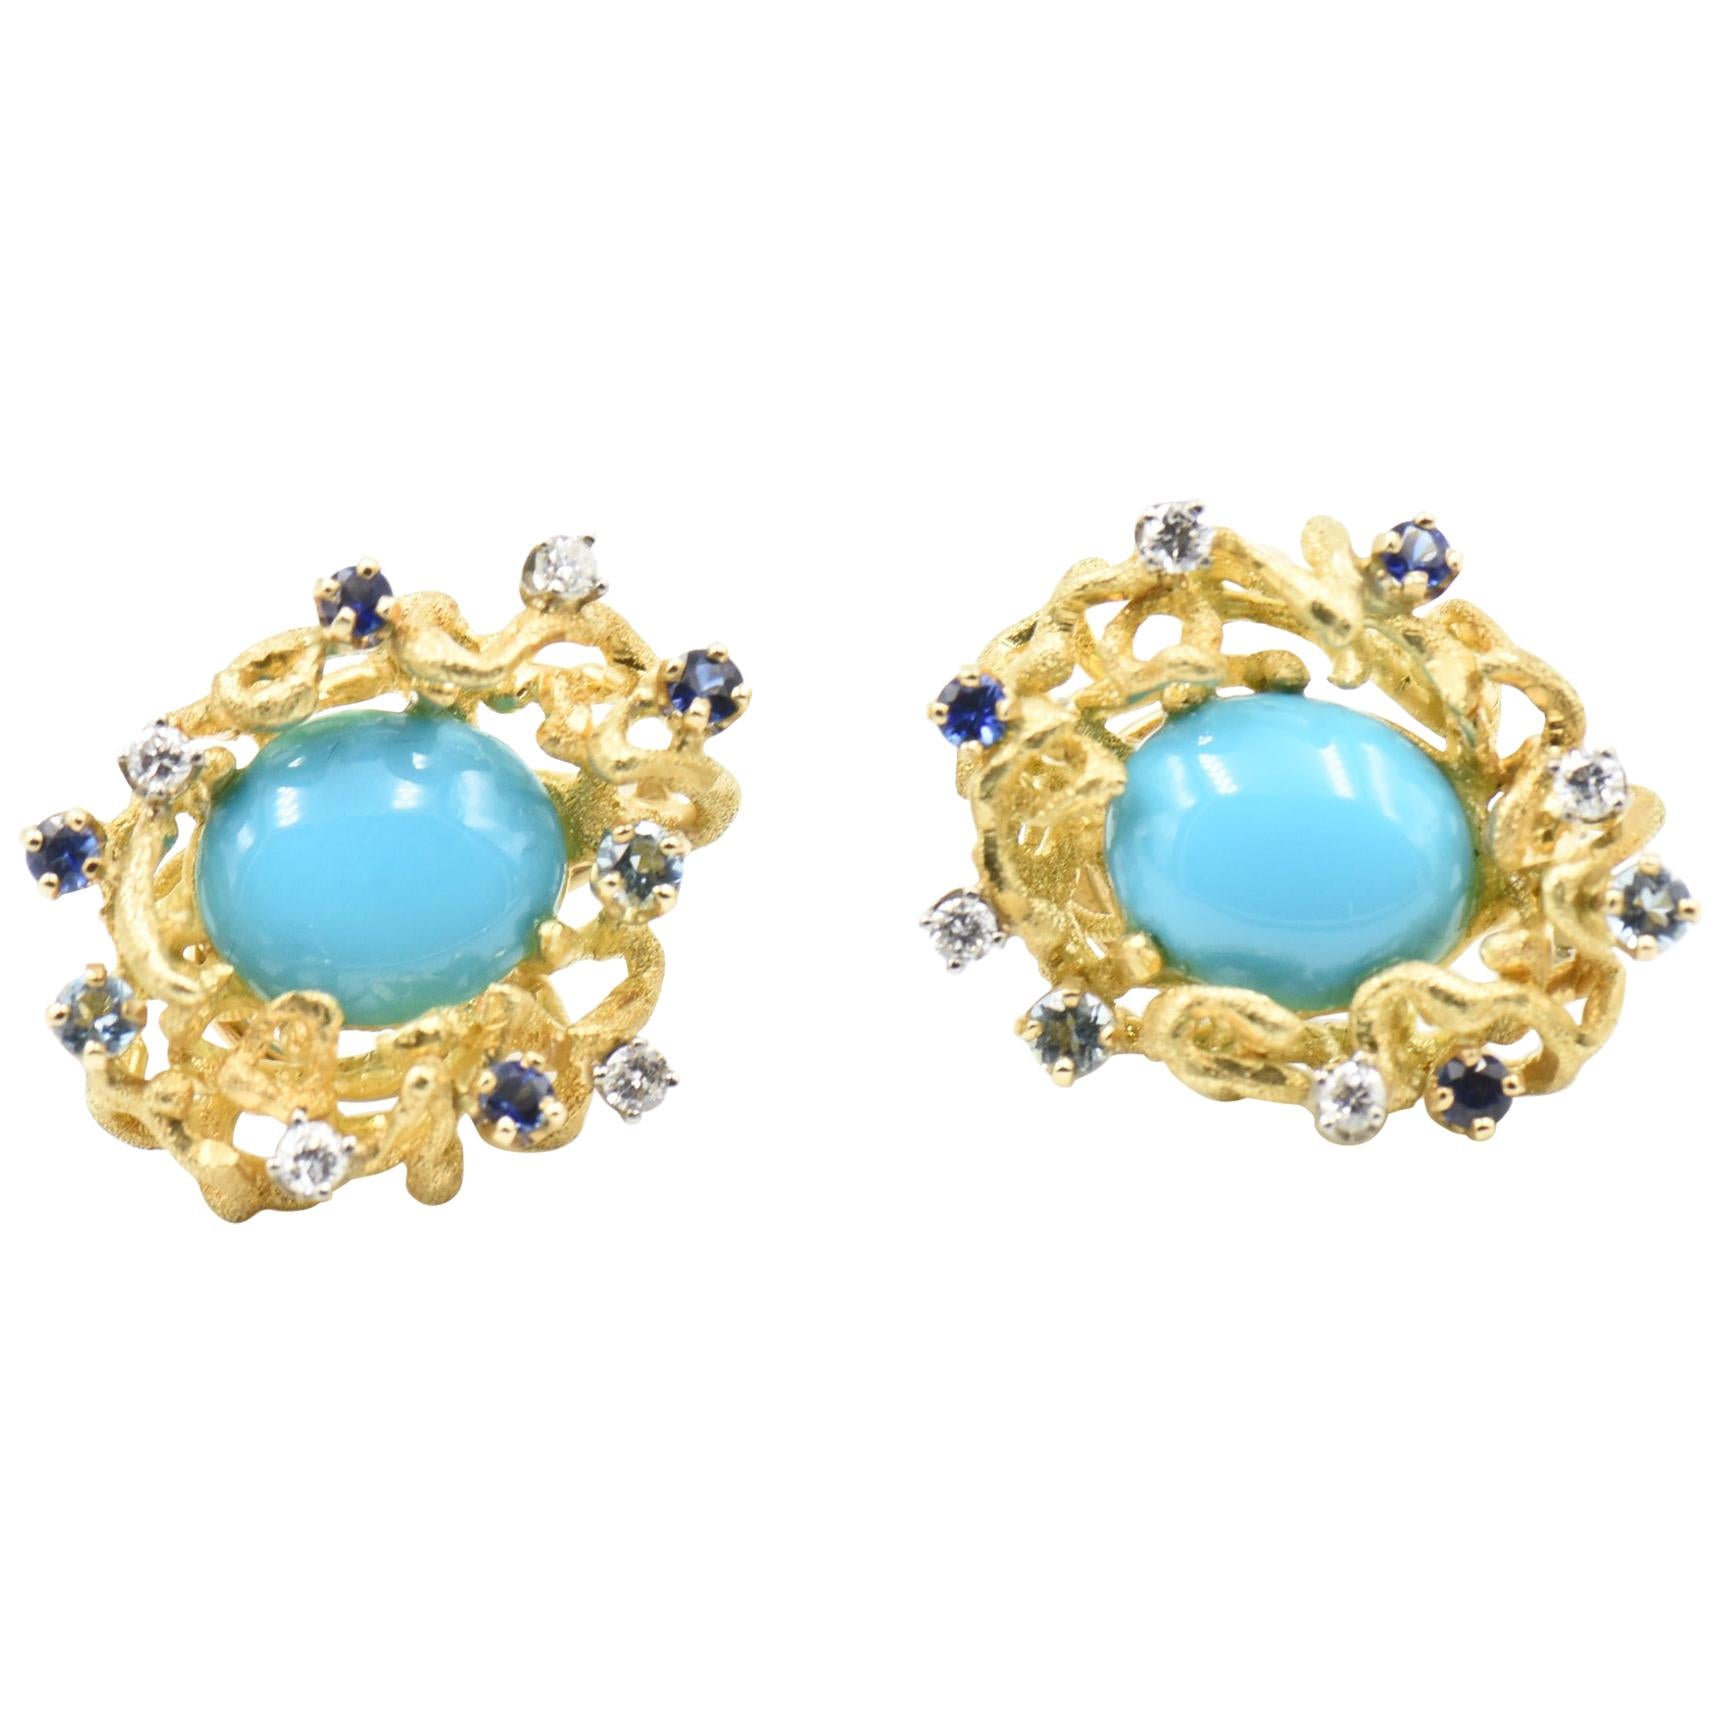 Modernist Turquoise, Sapphire, Diamond and Topaz Gold Earrings